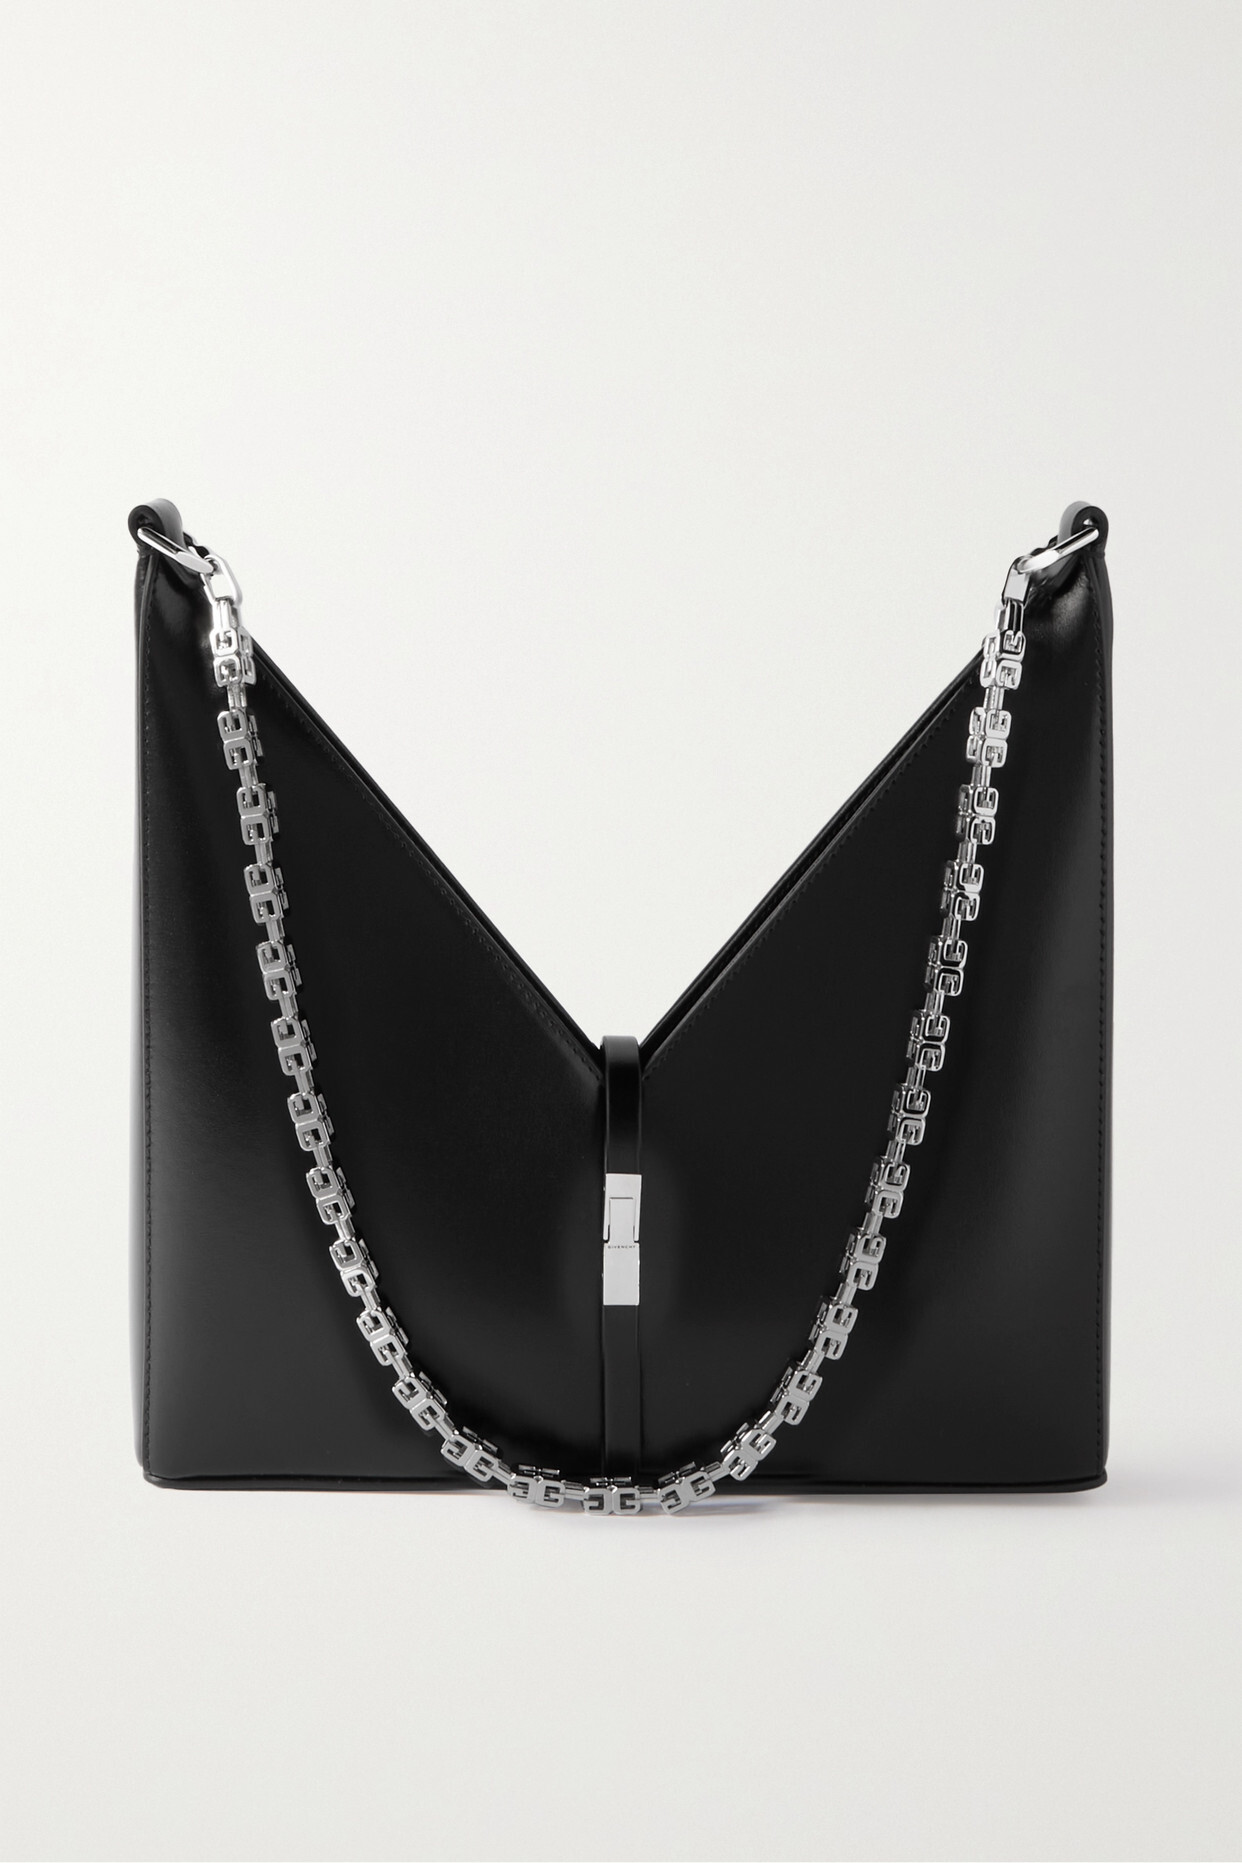 Givenchy - Cut Out Small Leather Shoulder Bag - Black